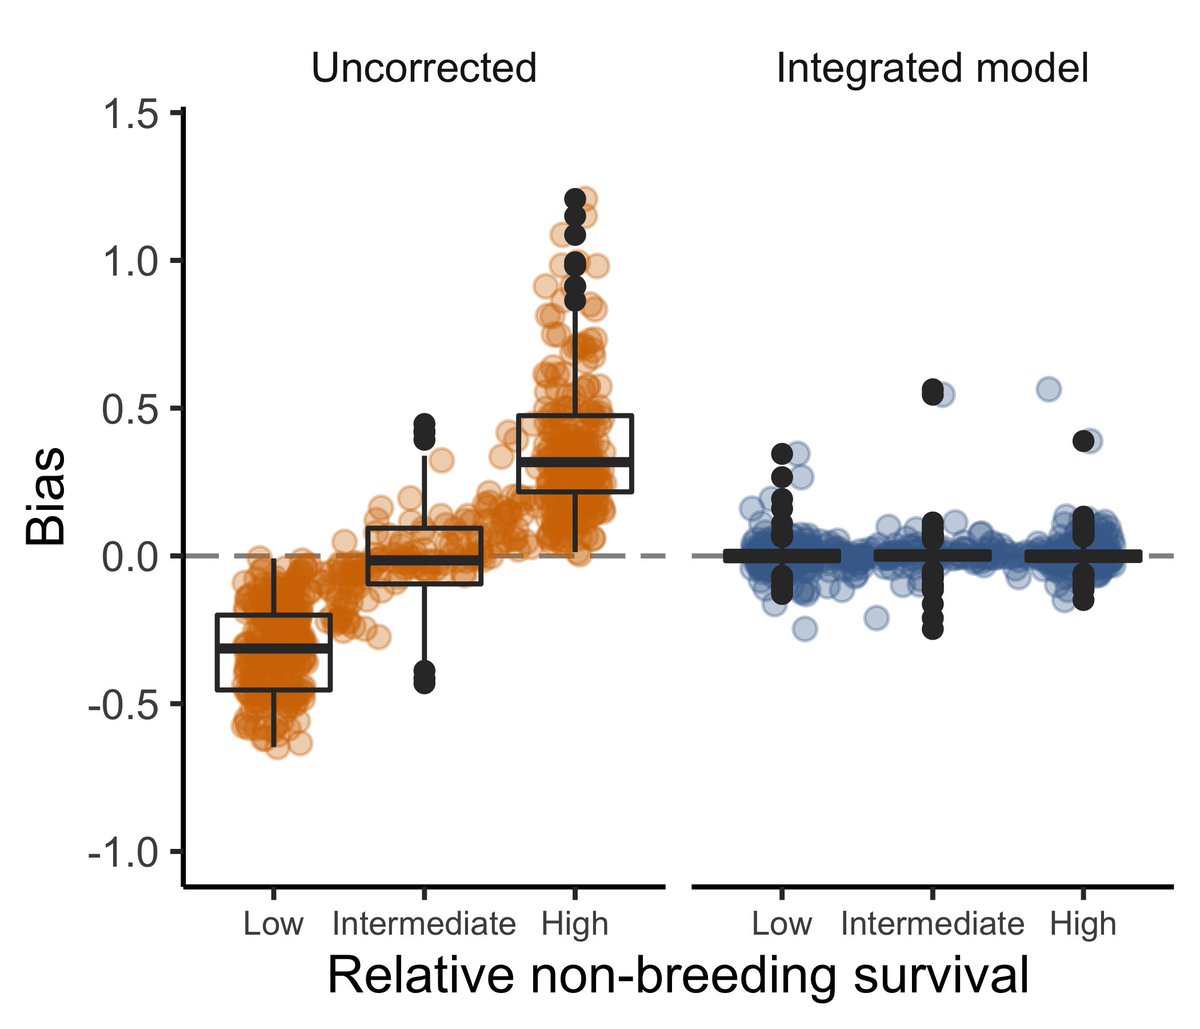 And this is just an inevitable bias of archival tags. Because you only see data from surviving individuals, you will systematically underestimate connectivity to regions with low survival (and overestimate regions with high survival)